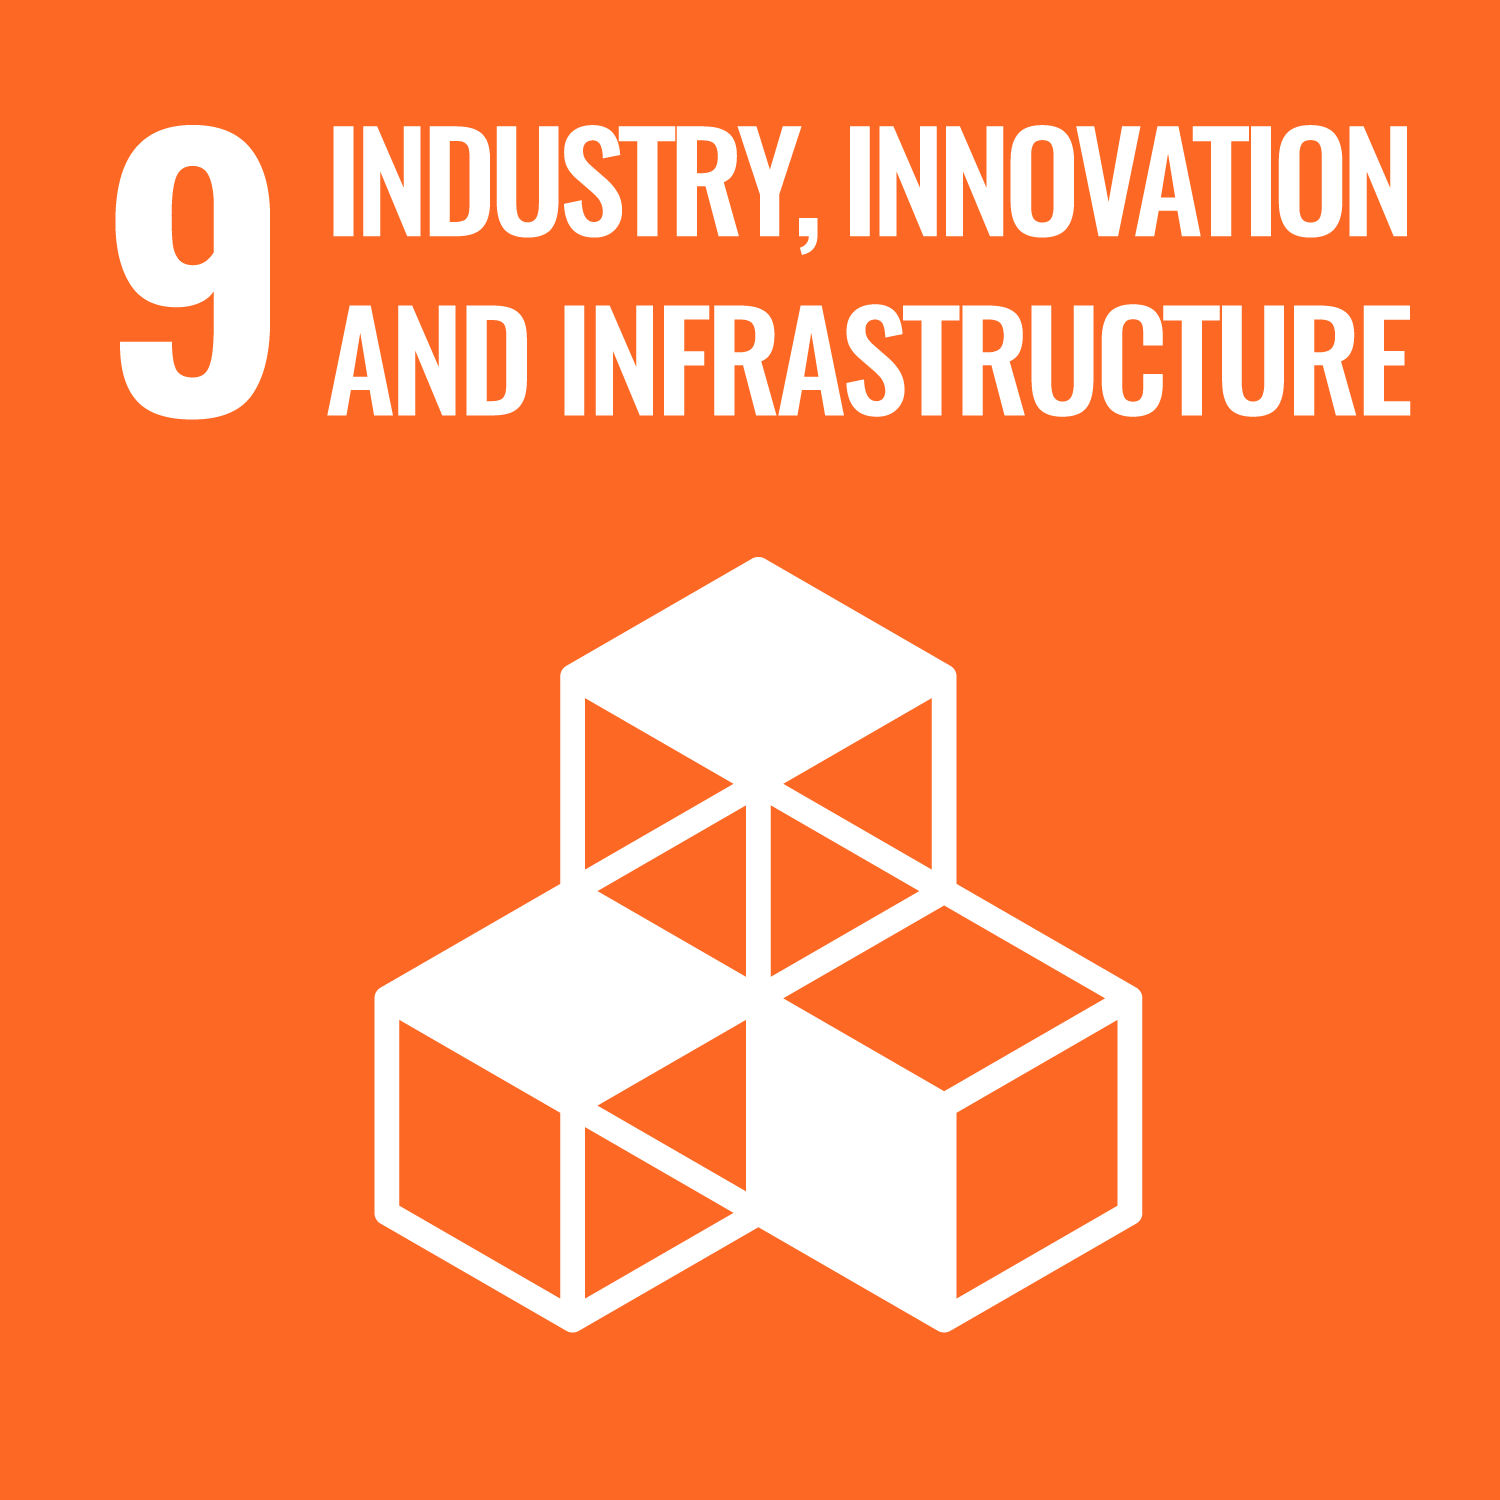 SDGs 9 INDUSTRO, INNOVATION AND INFRASTRUCTURE